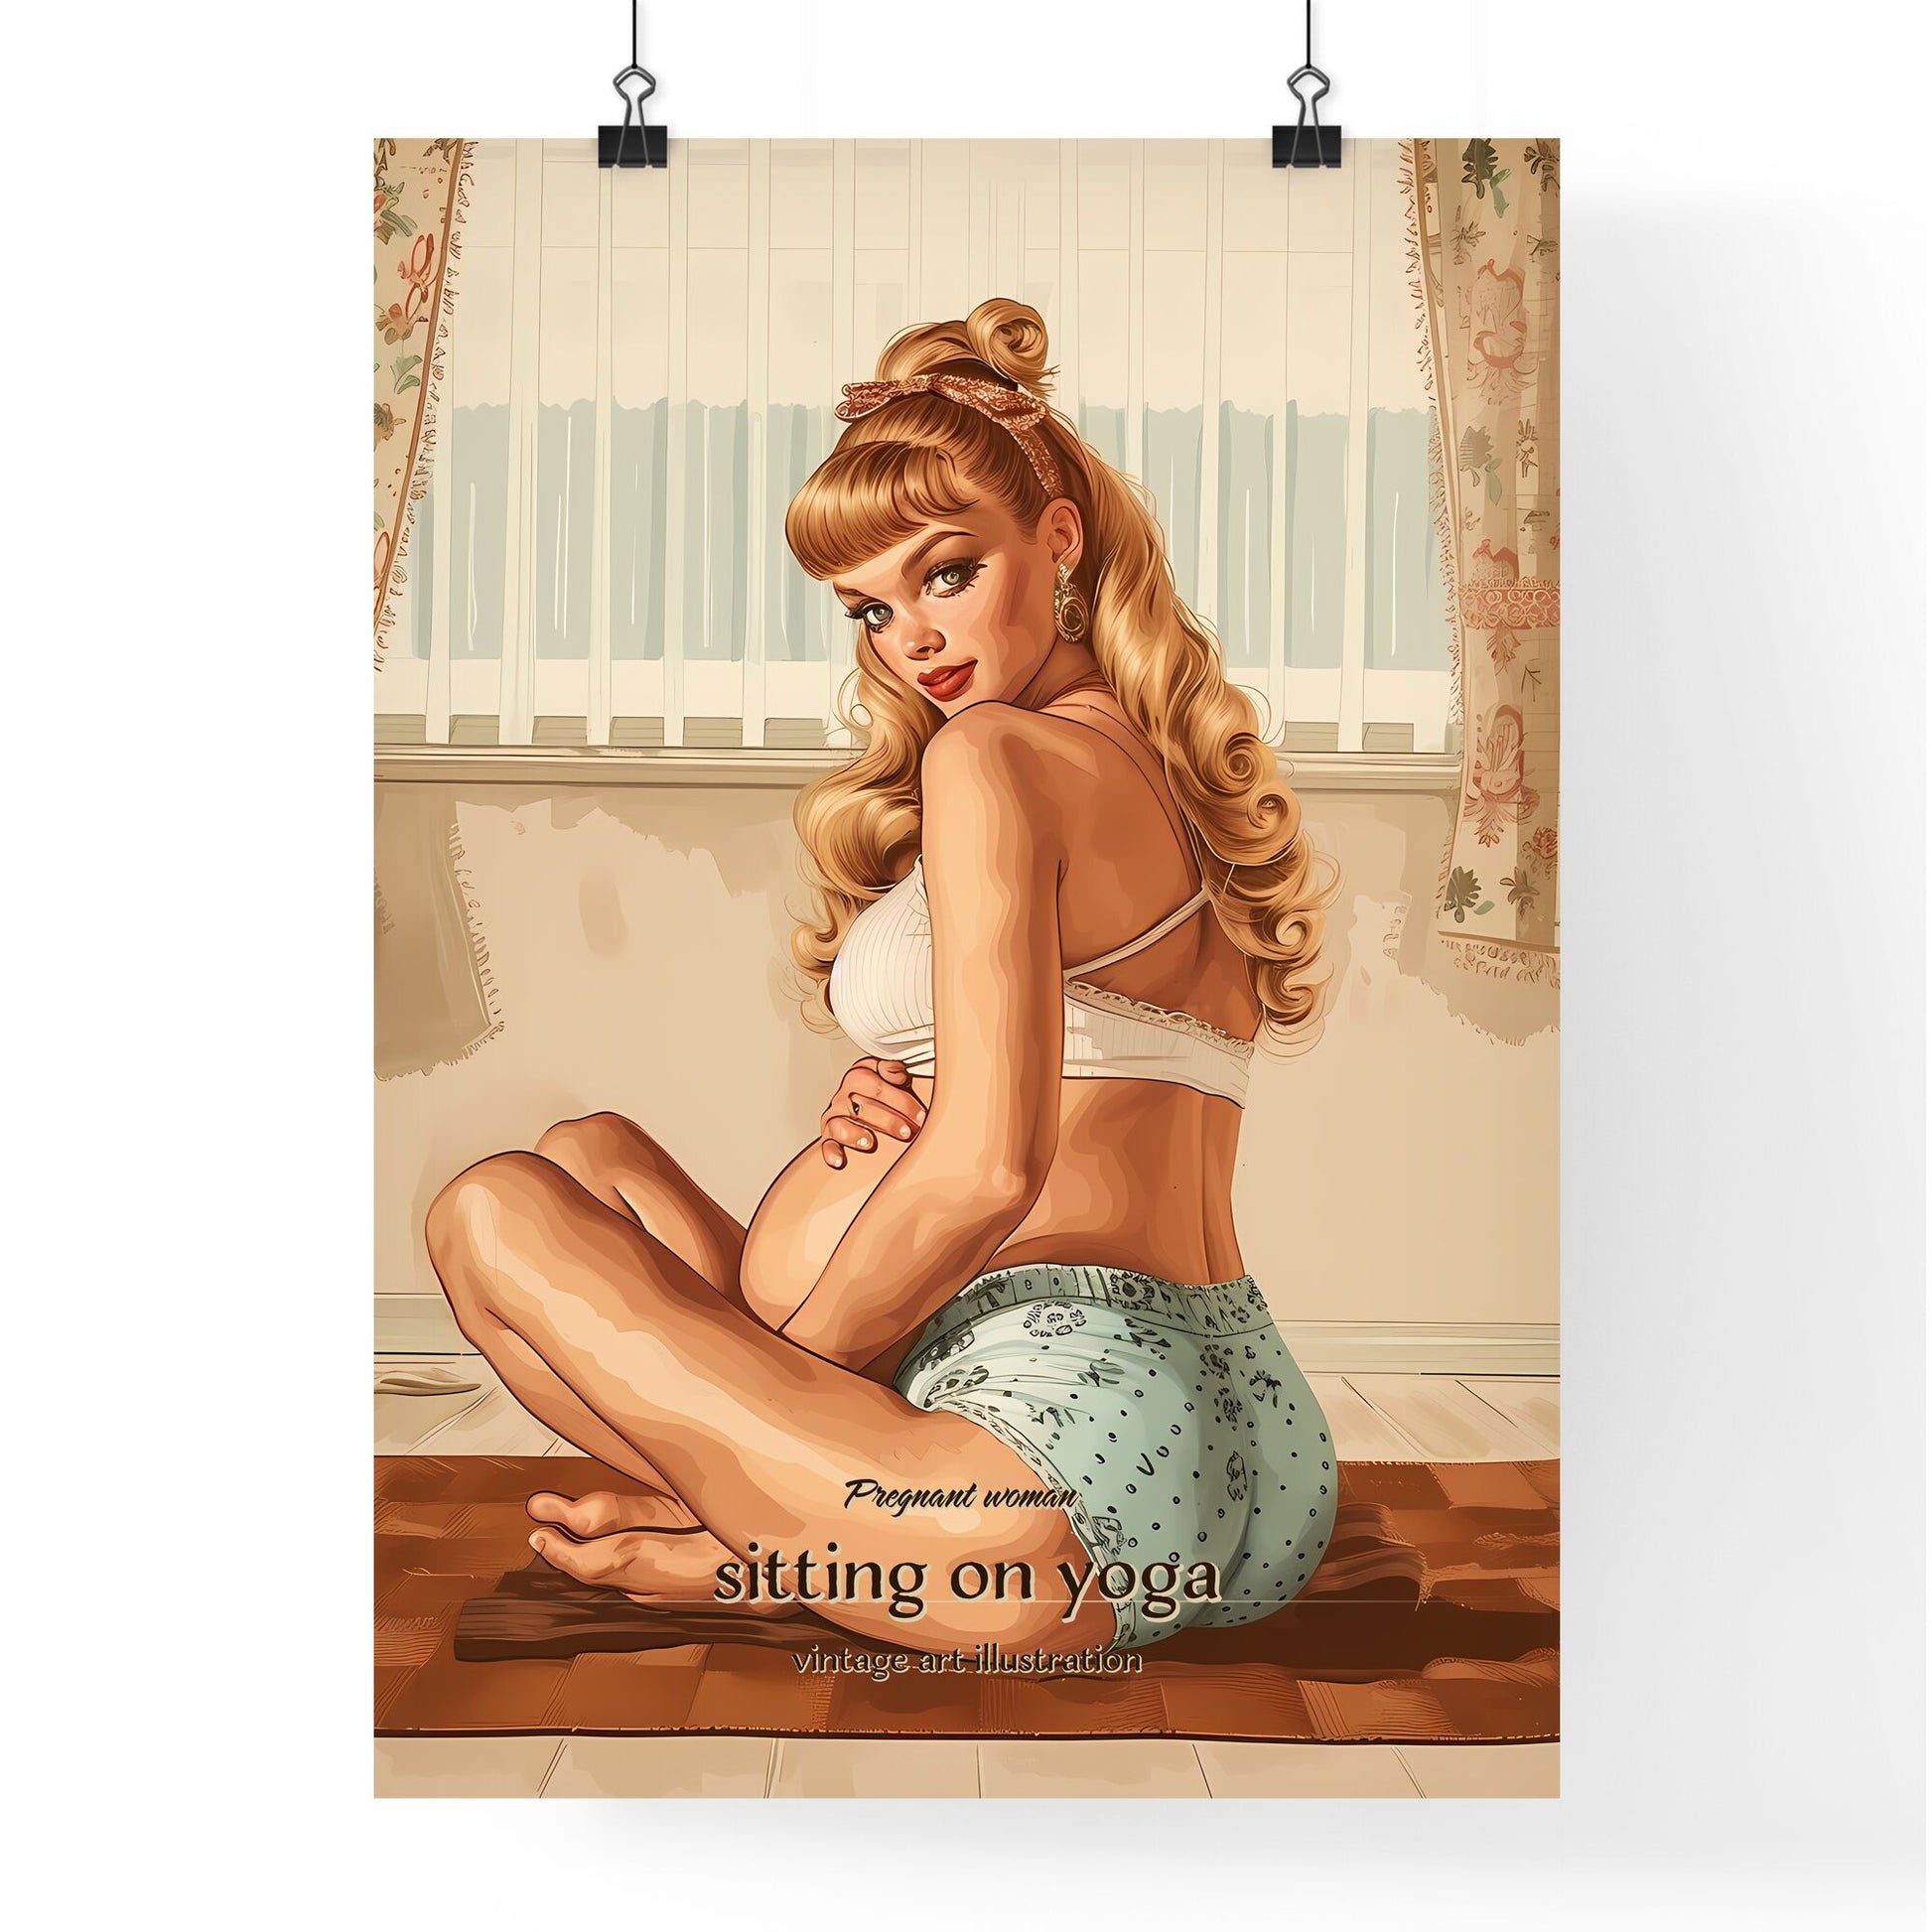 Pregnant woman, sitting on yoga, vintage art illustration, A Poster of a woman sitting on a rug Default Title